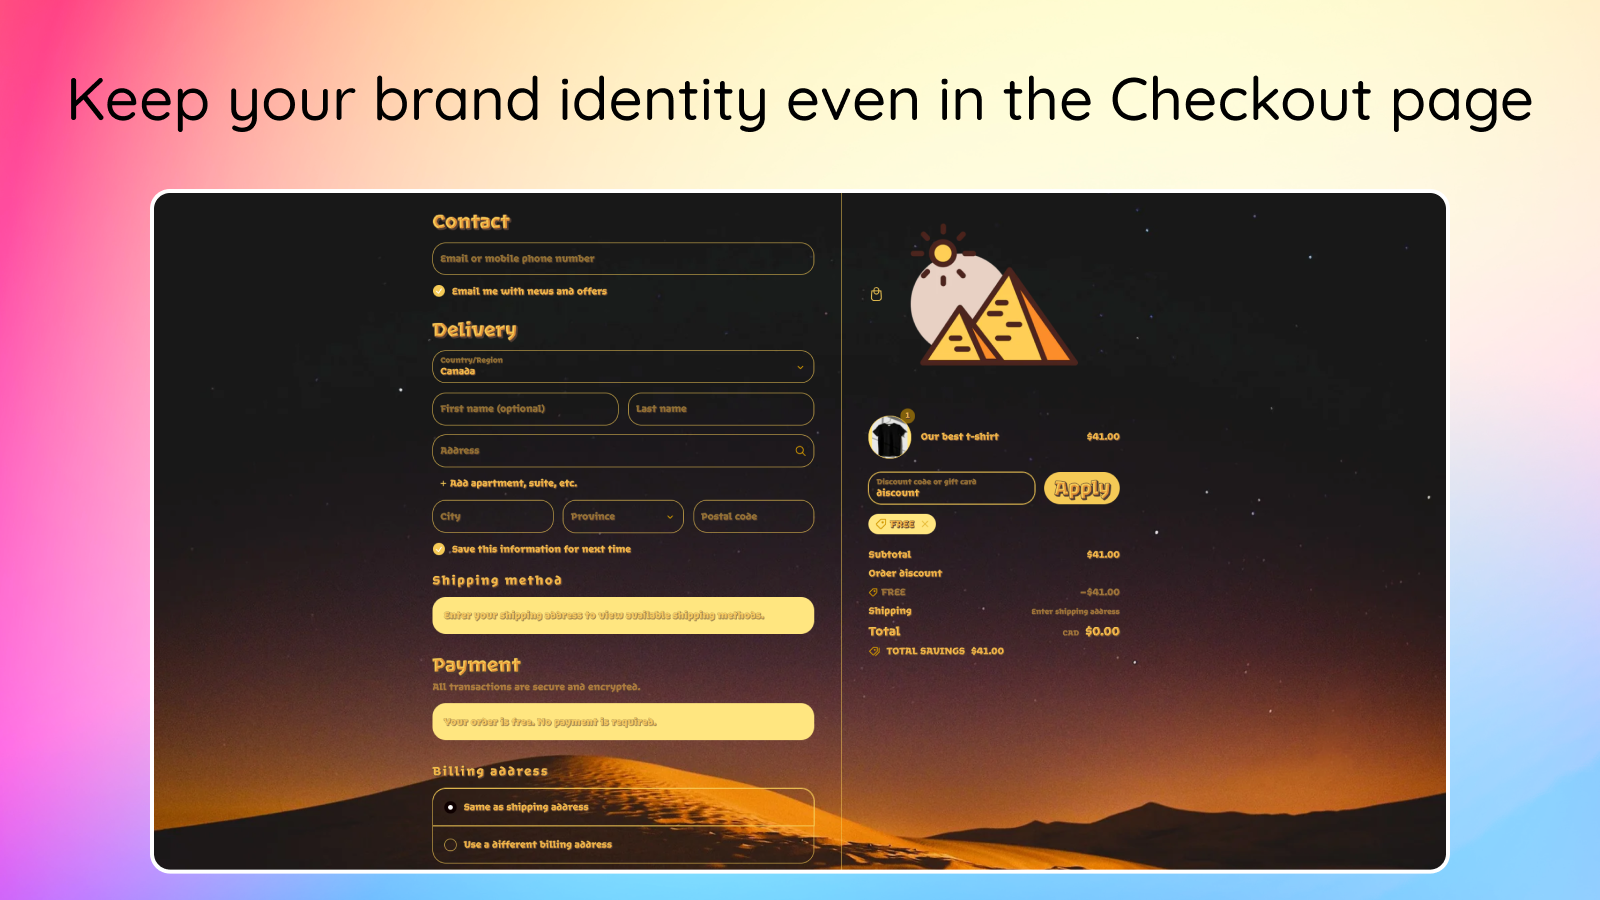 Keep your brand identity even in the Checkout page